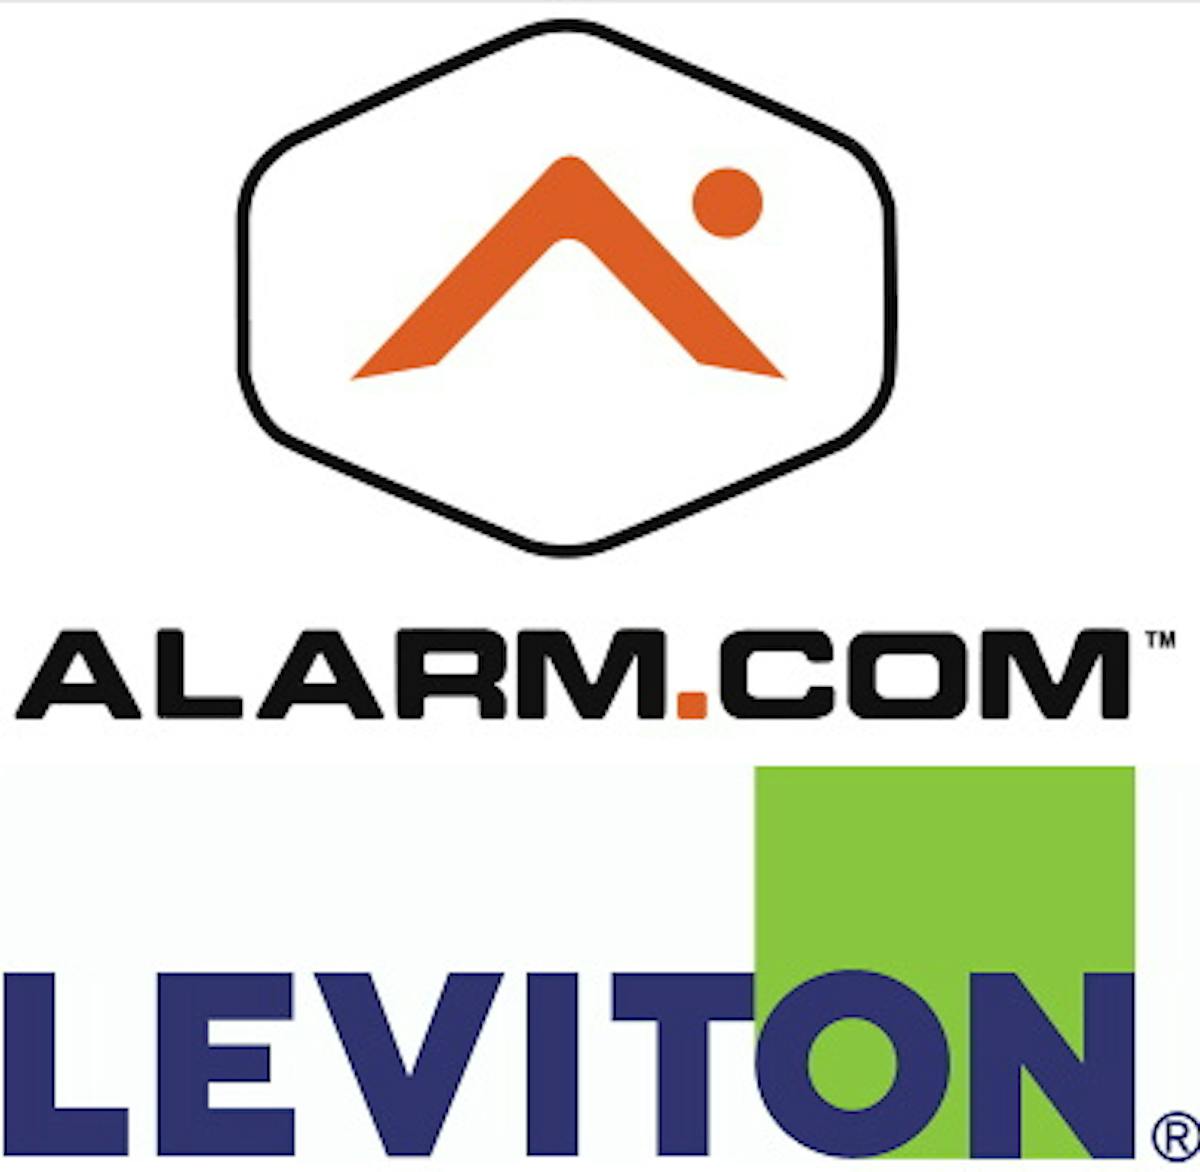 Leviton has partnered with Alarm.com as an approved provider of certain Z-Wave lighting controls for Alarm.com installations.